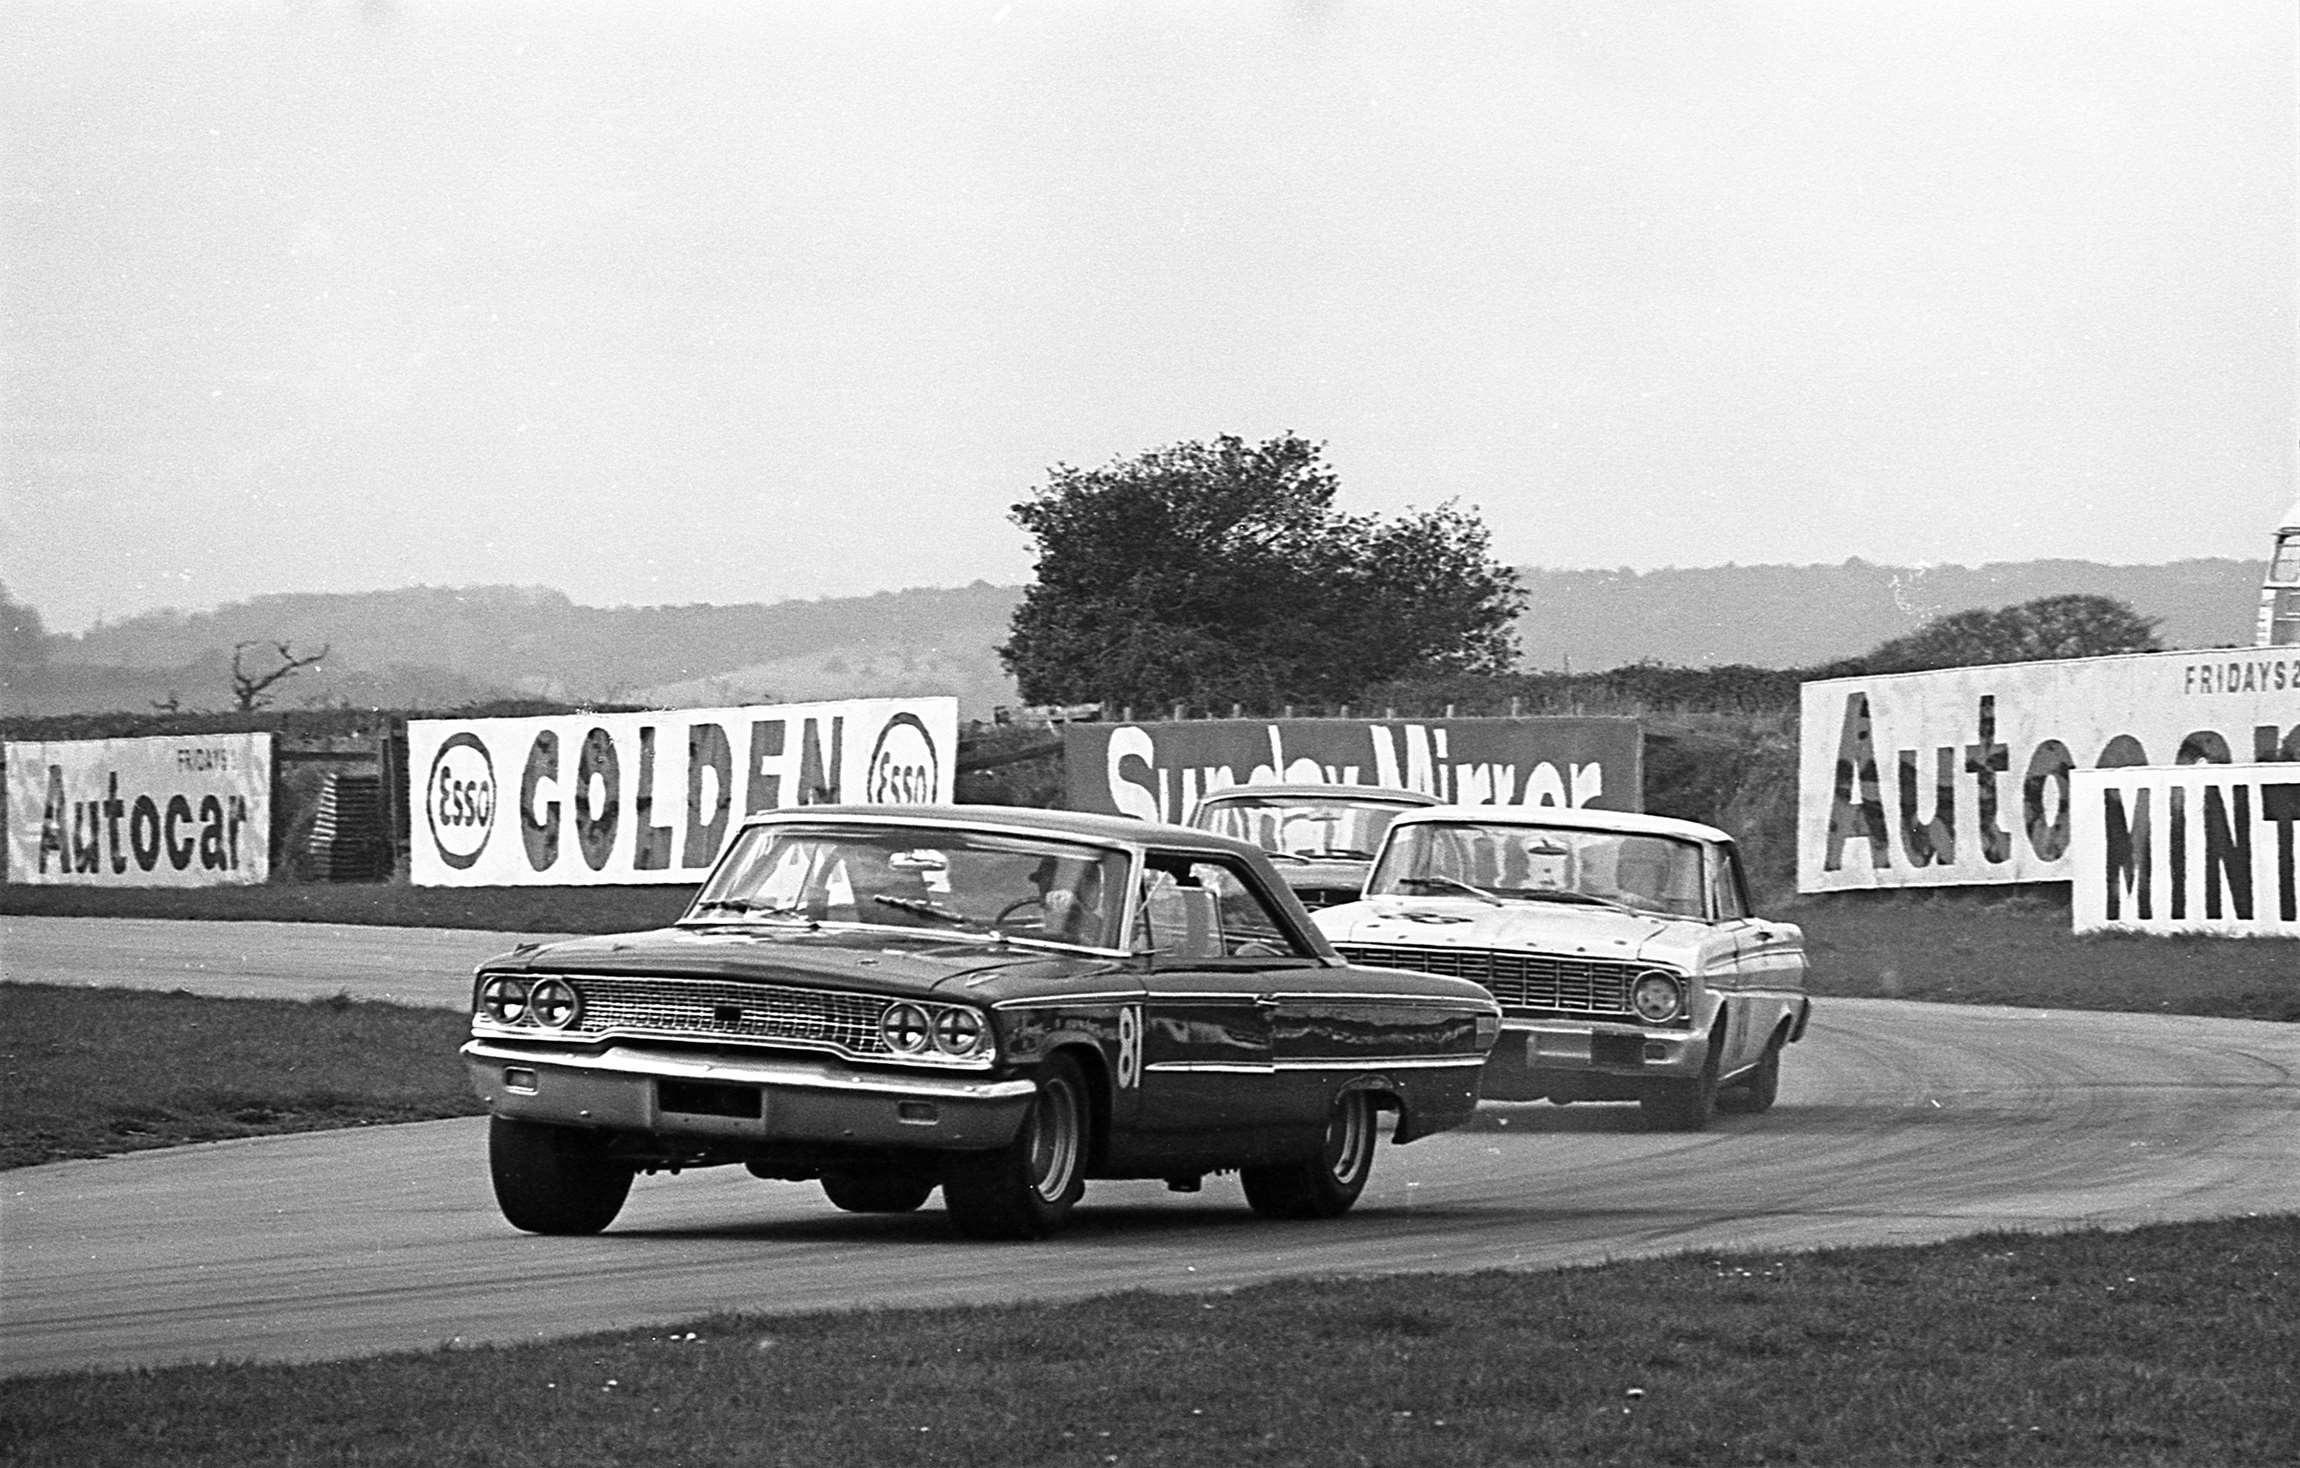 Brian Muir in the John Willment Ford Galaxe leads Sir Gawaine Baillie’s Ford Falcon at Woodcote Corner